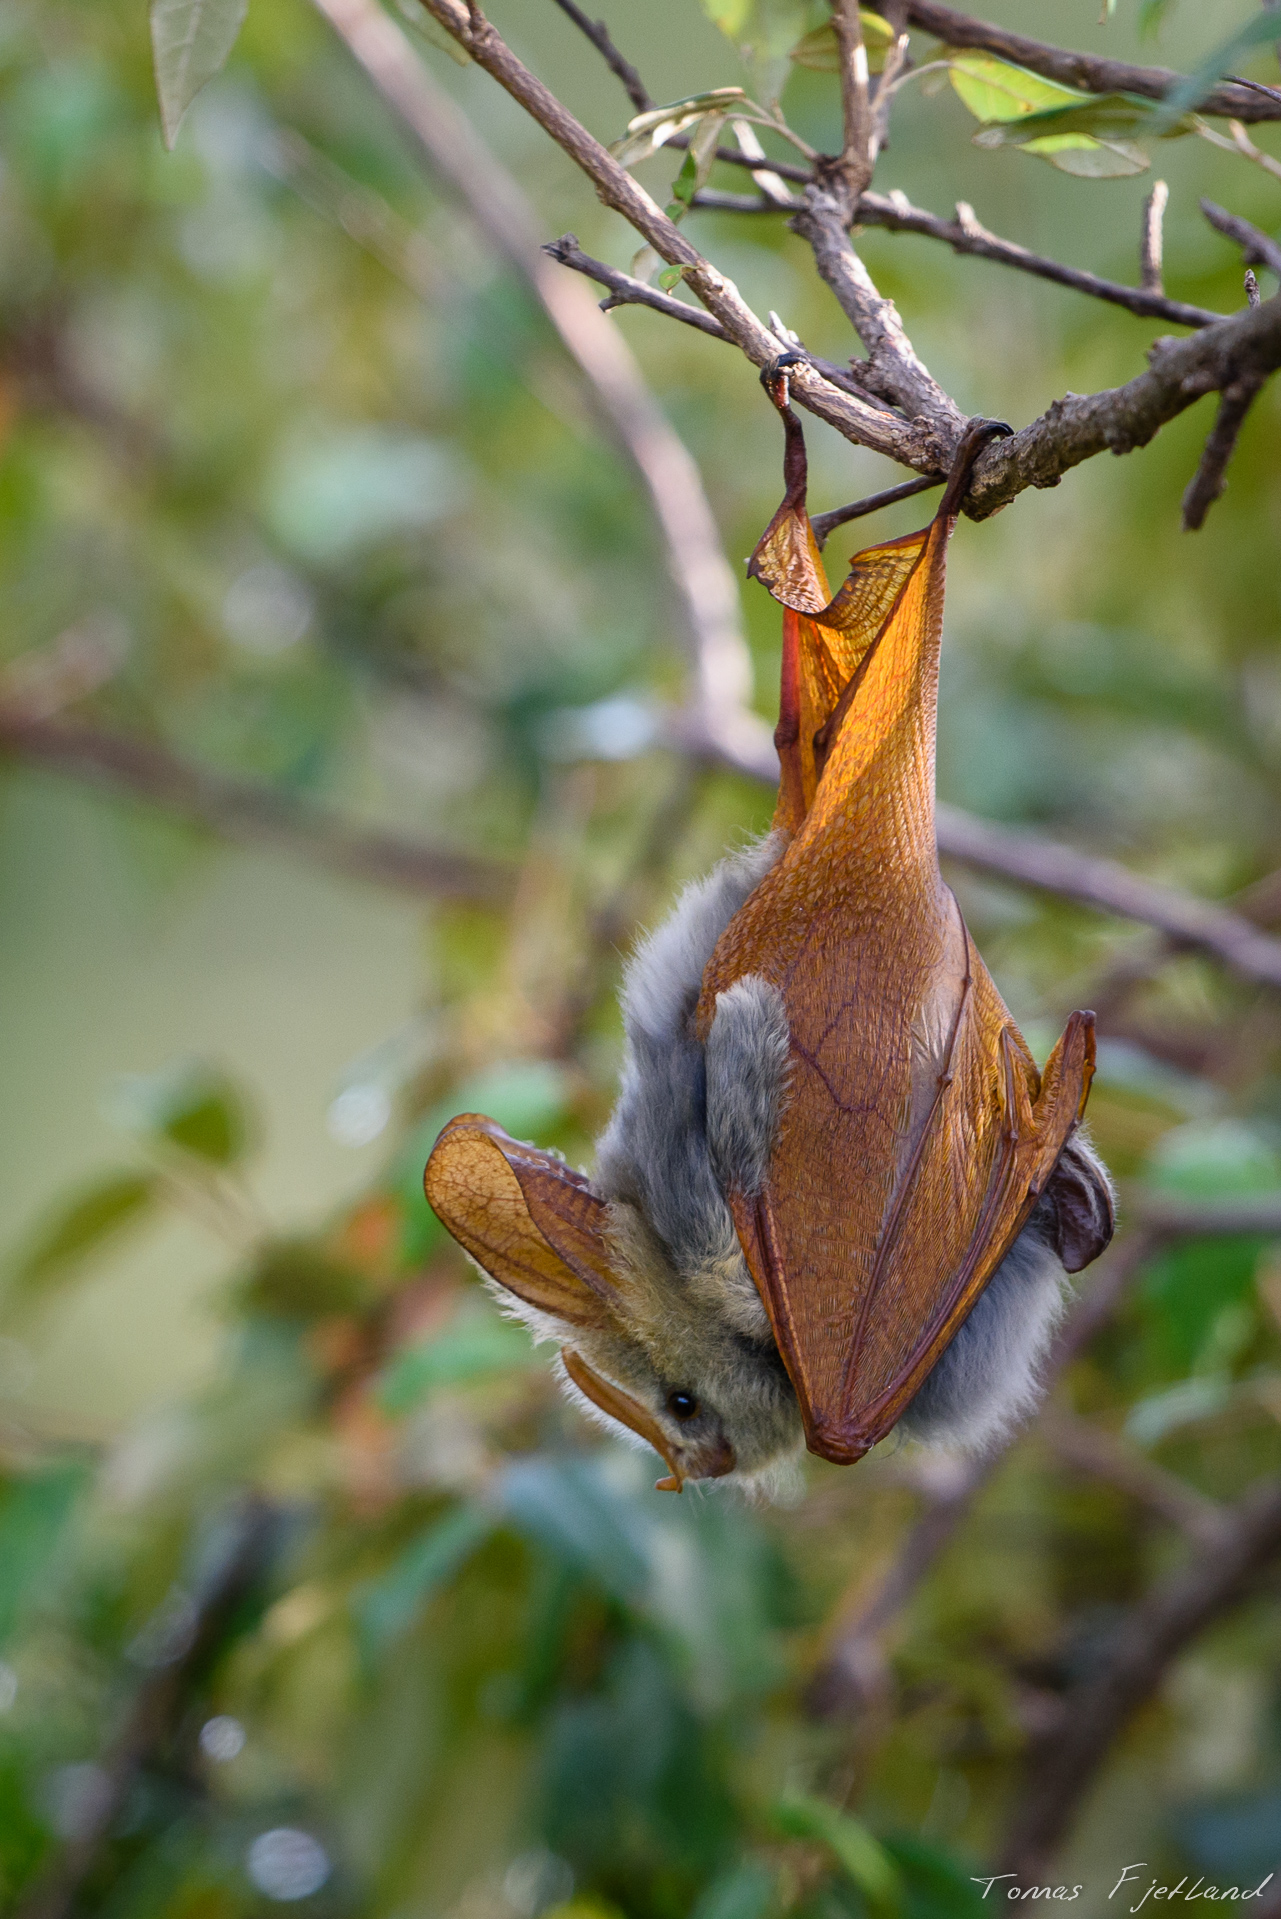 A Yellow-winged bat hanging just some 150cm above the ground, looking like a dried fruit or shrivelled leaf